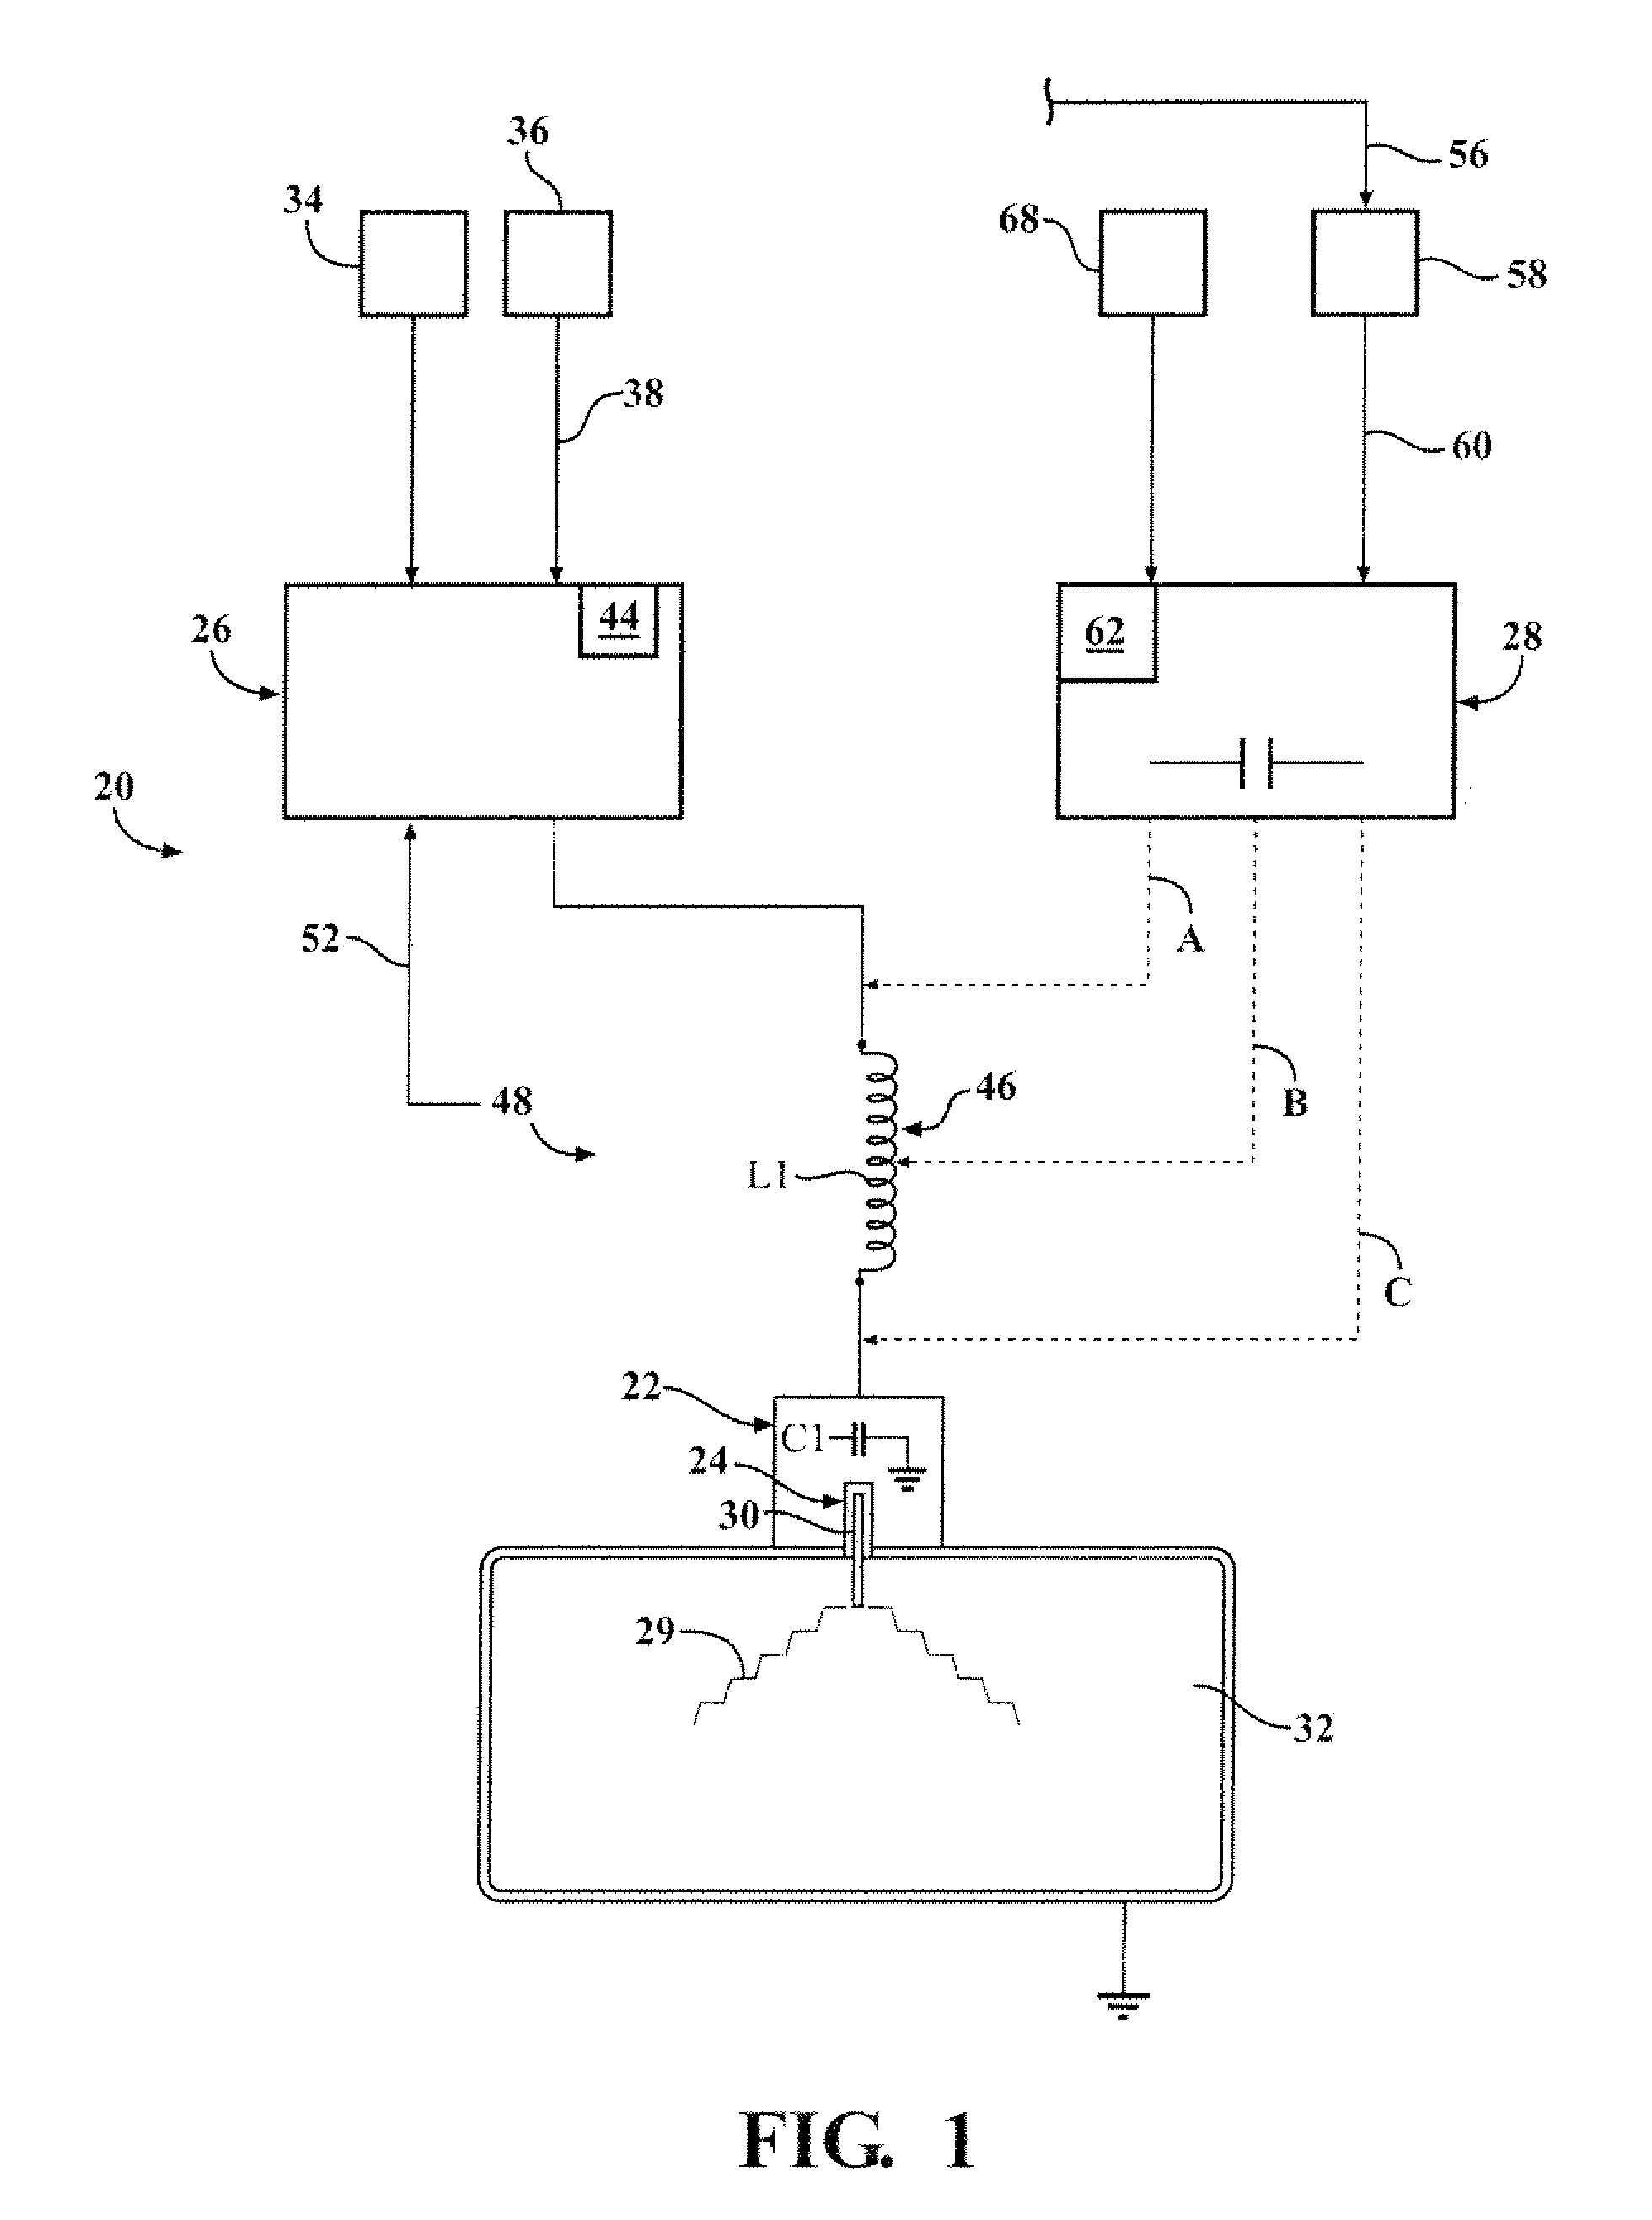 Electrical arrangement of hybrid ignition device